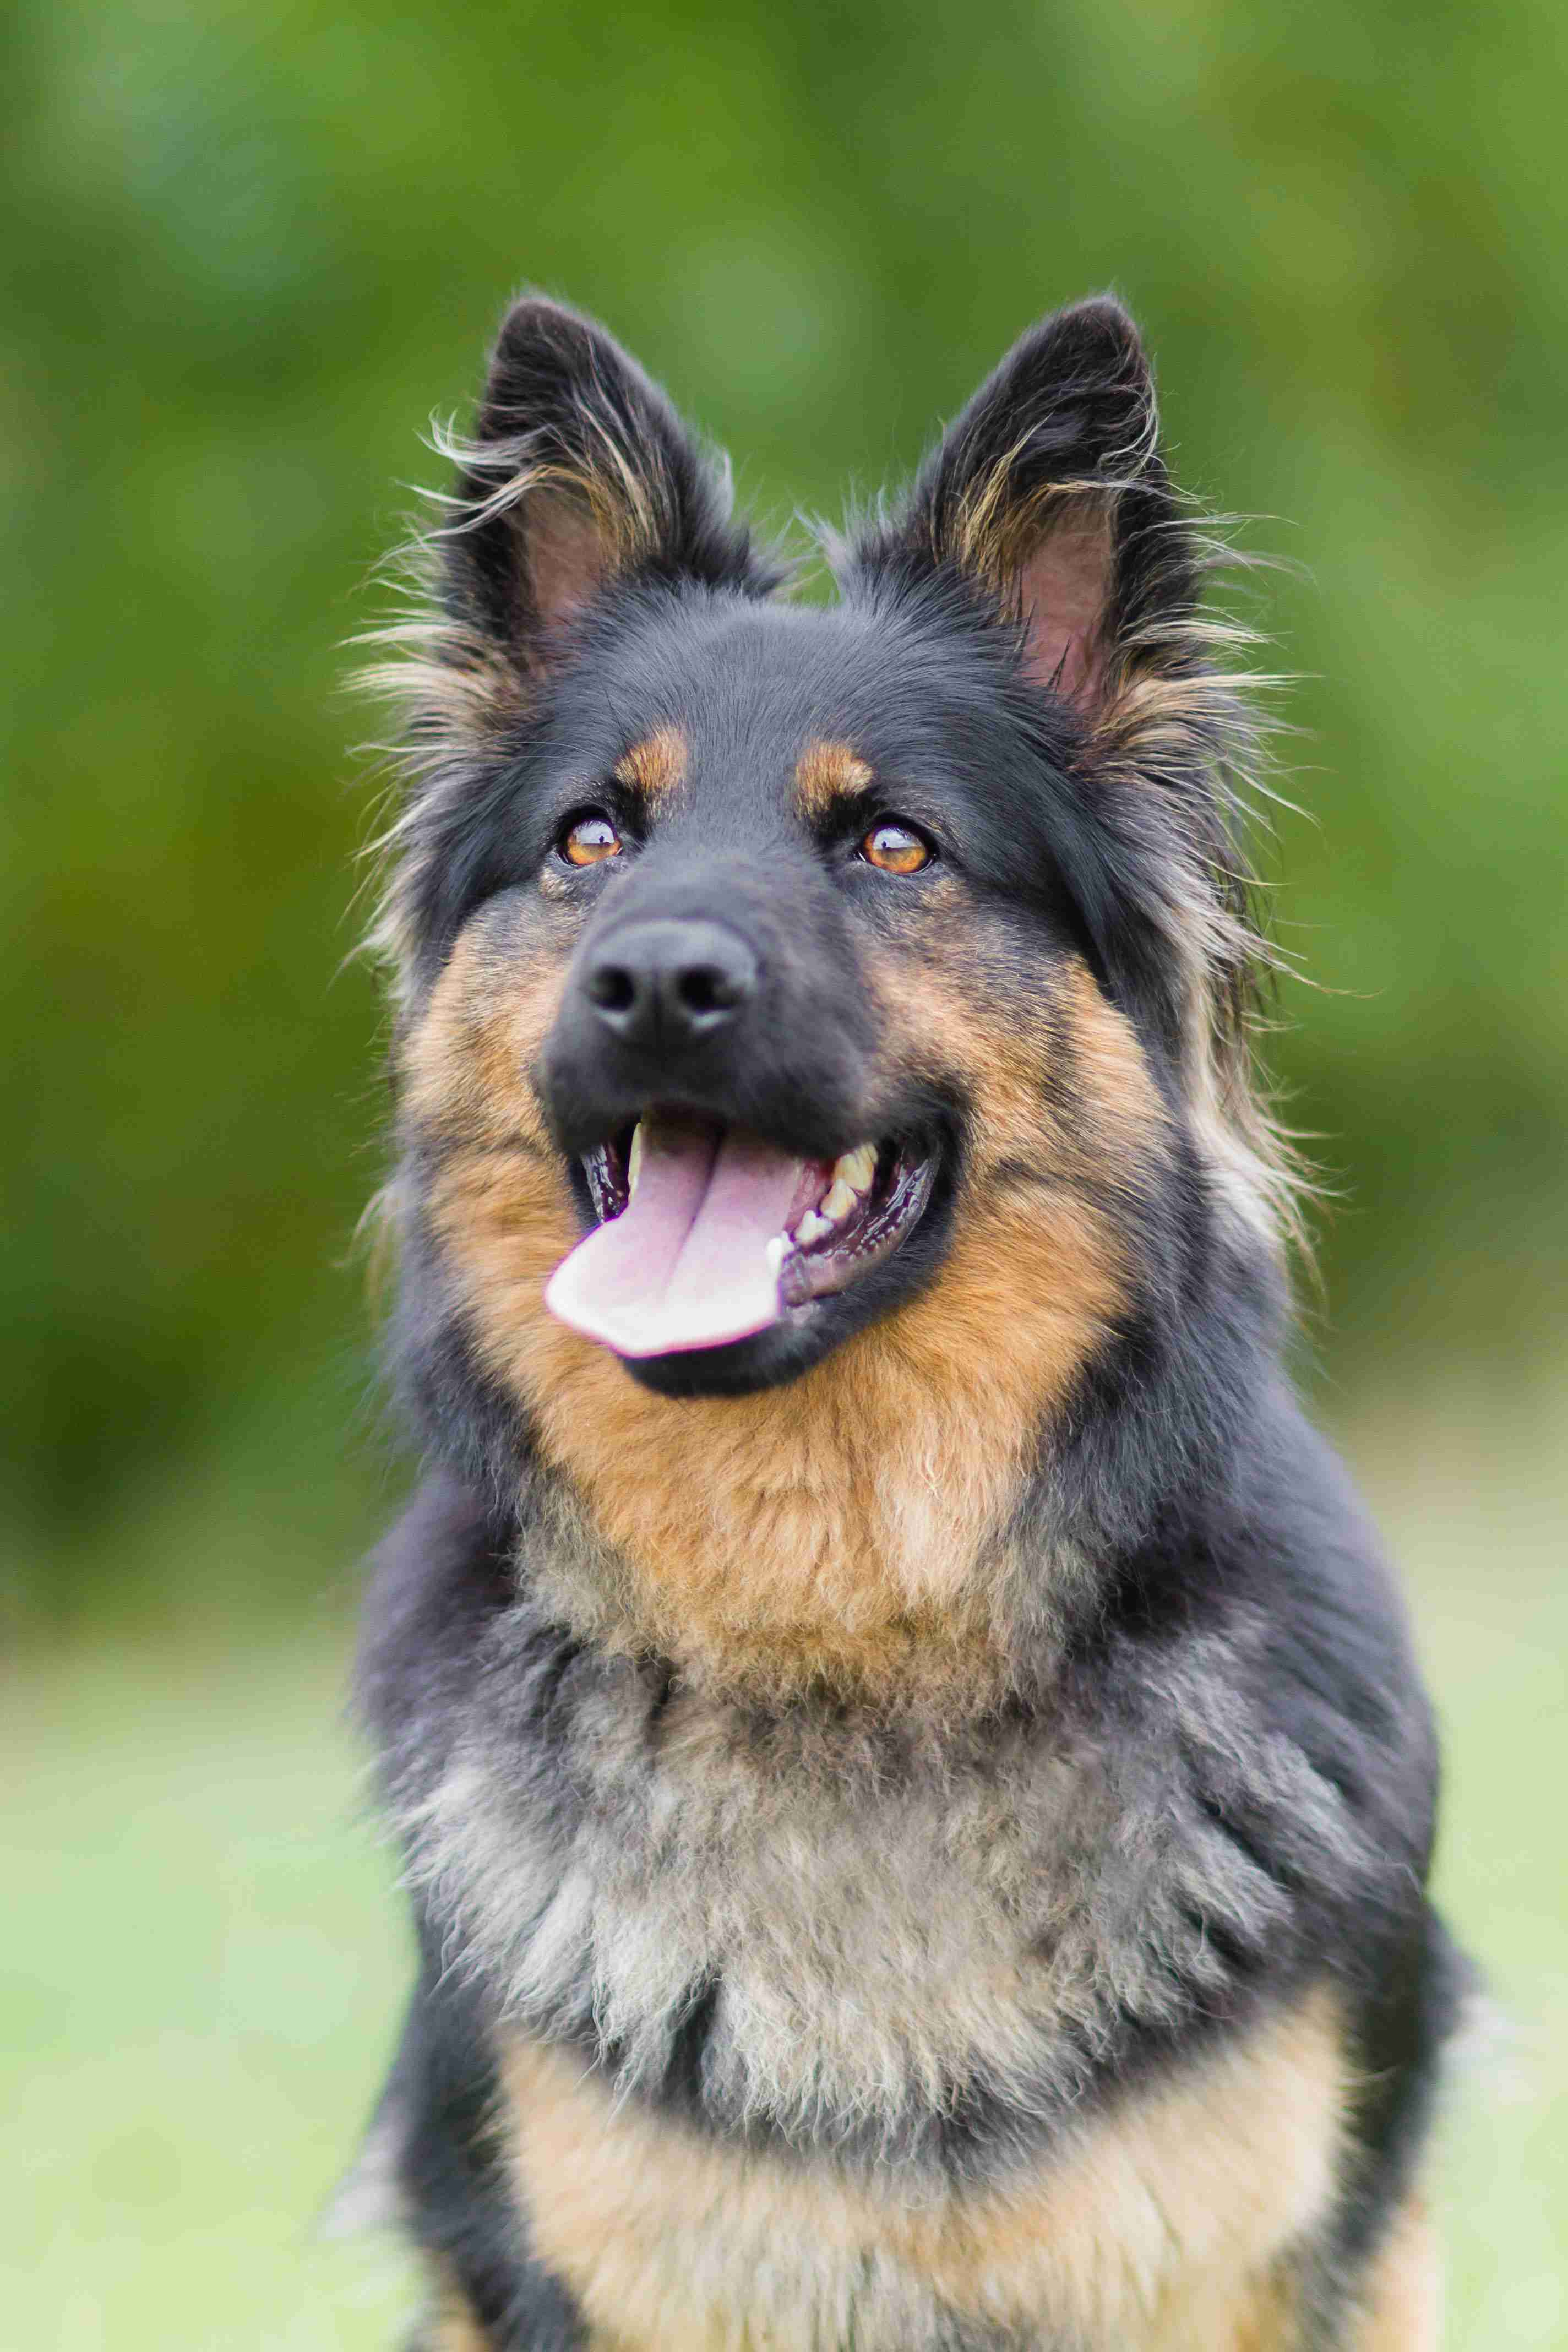 How do you prevent eye infections in a German shepherd?